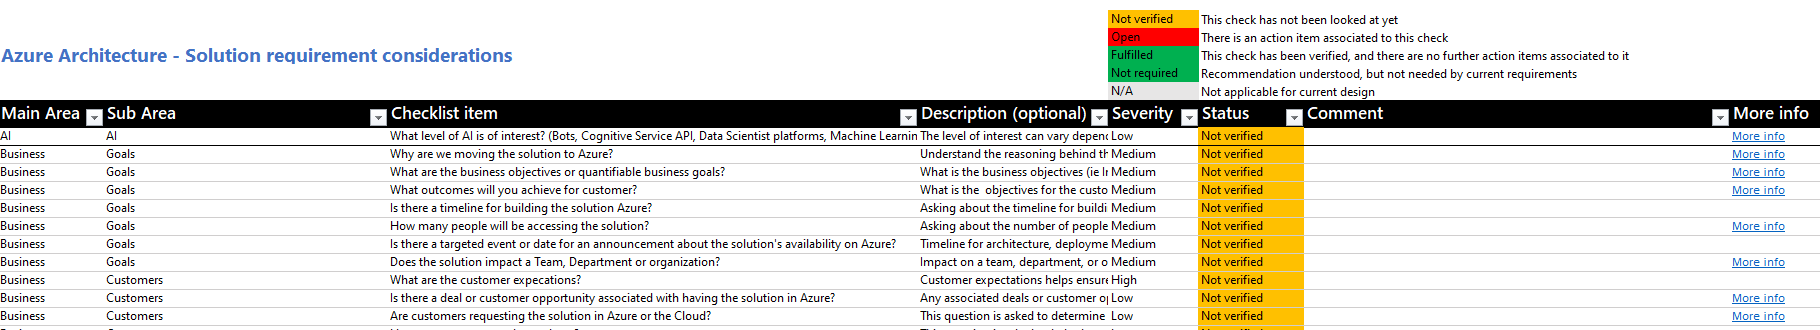 Azure Architecture - Solution requirement considerations